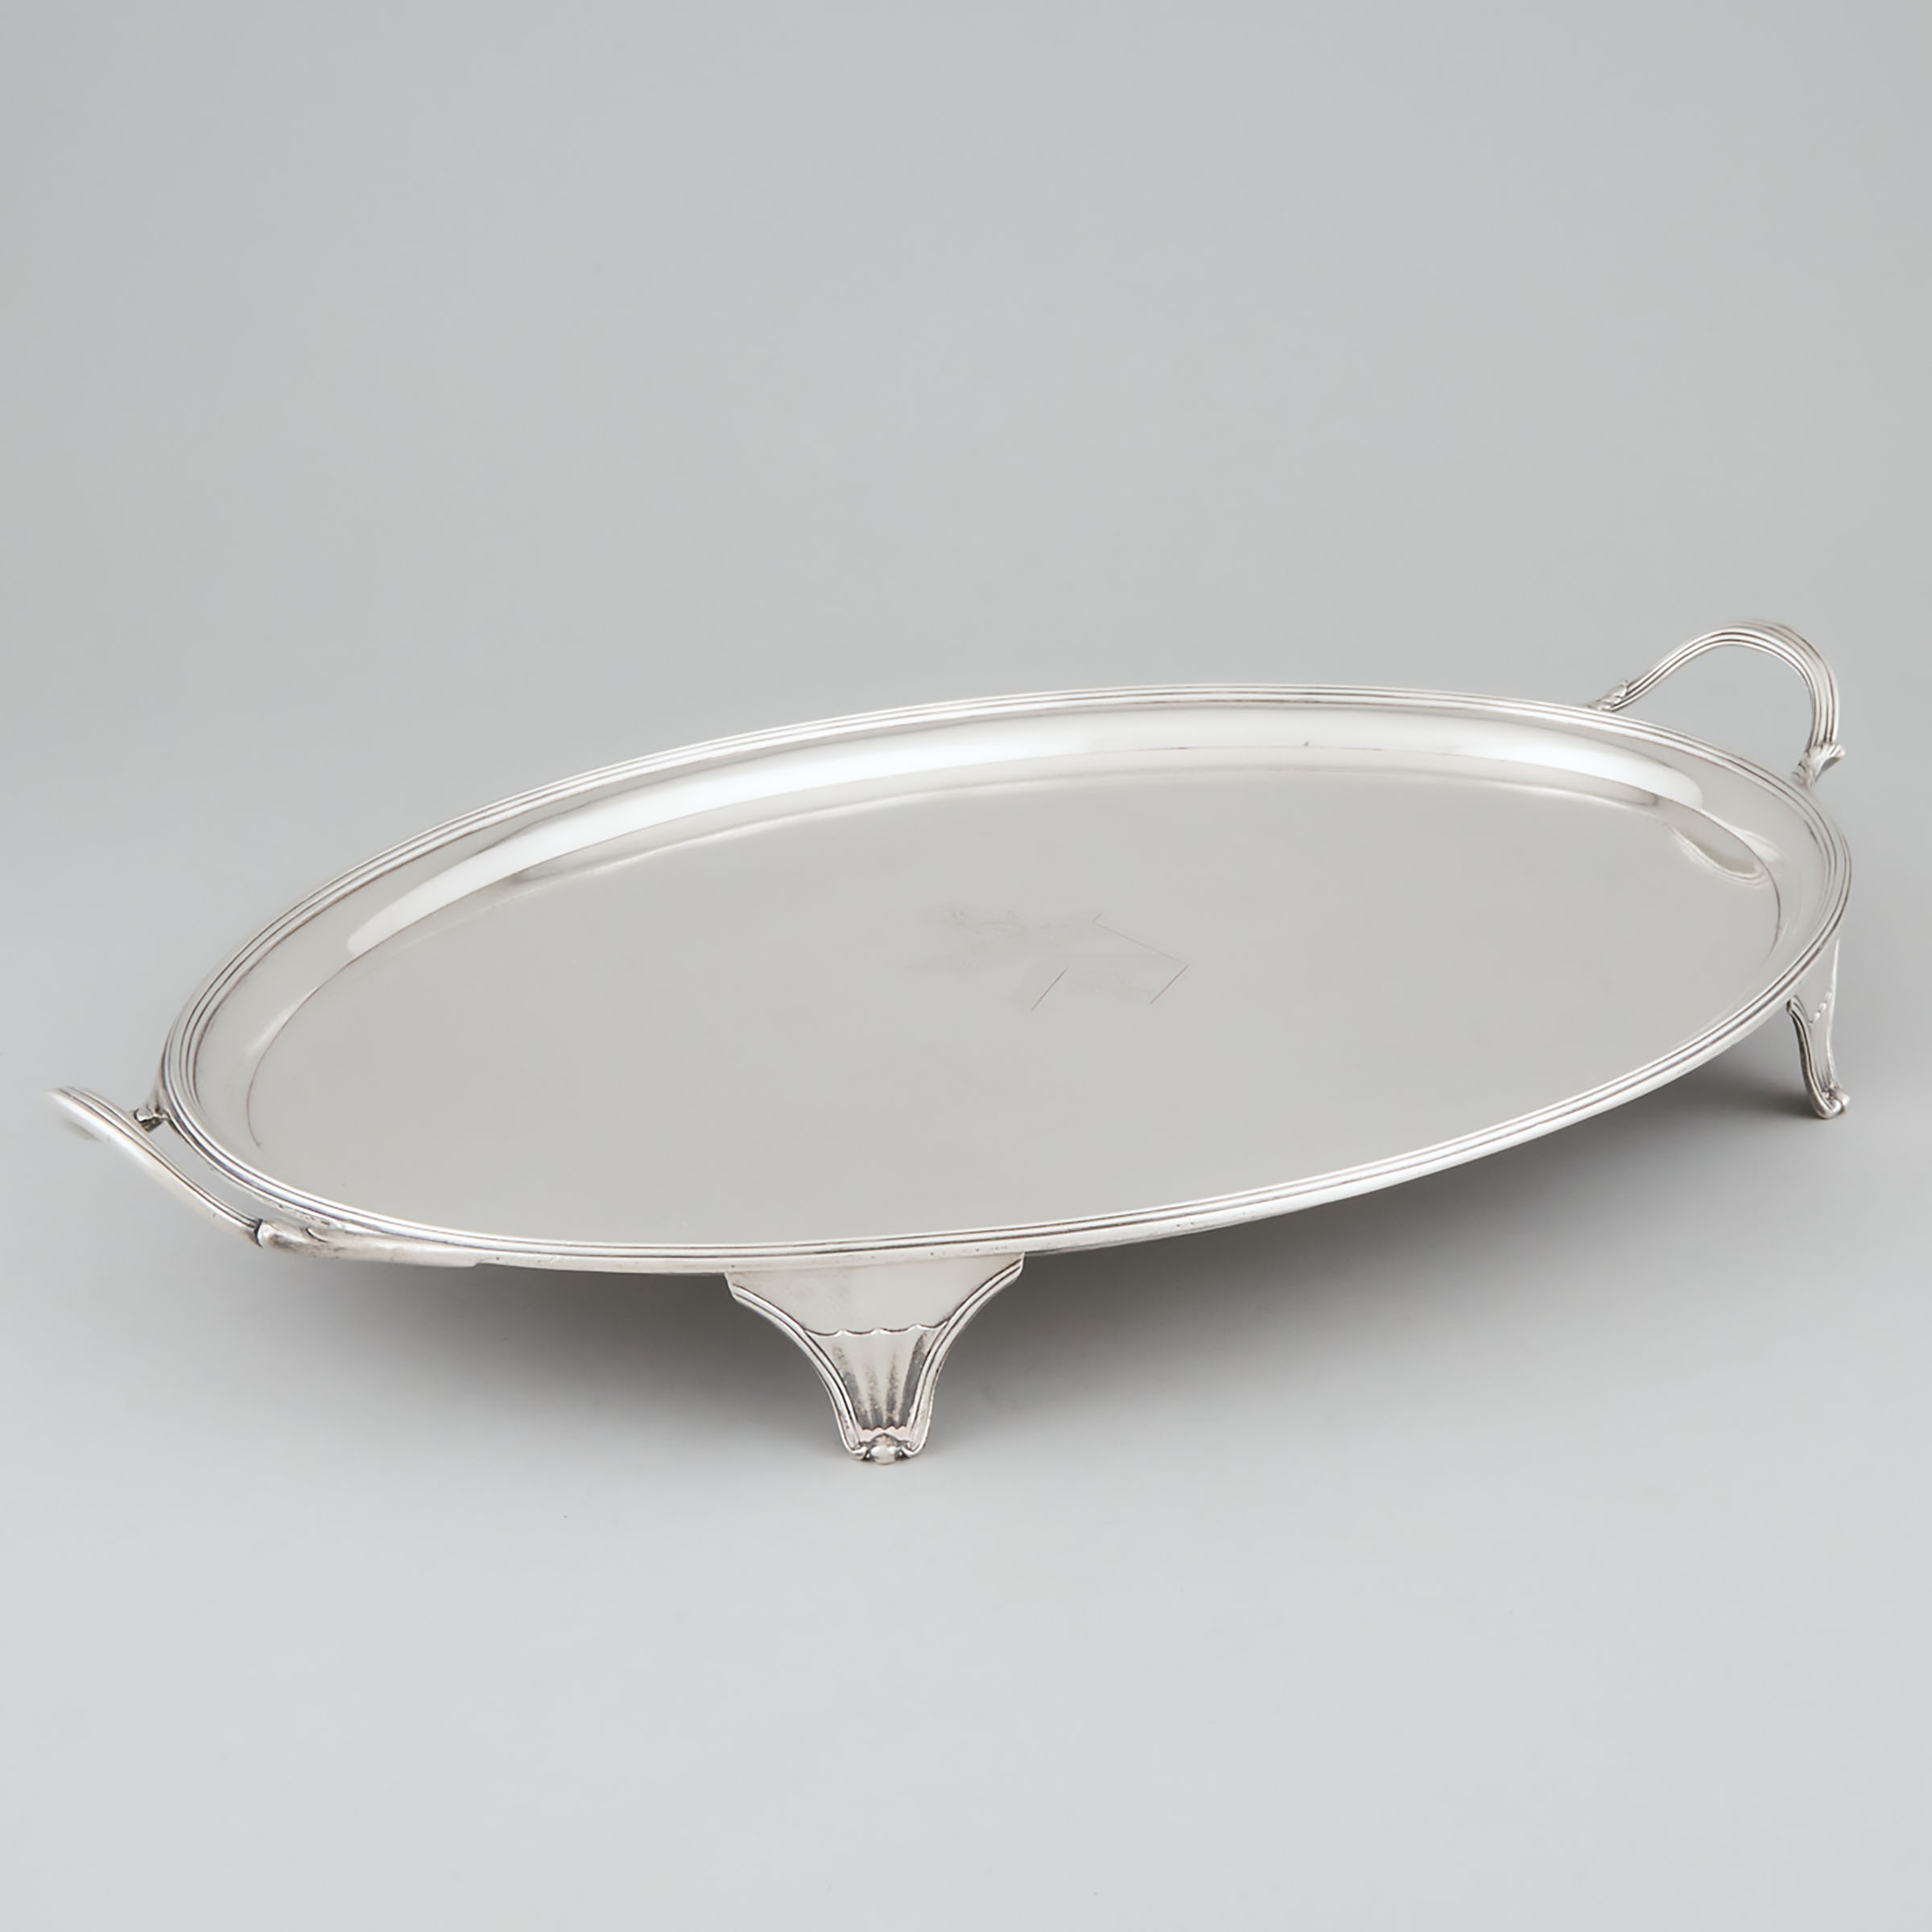 George III Silver Two-Handled Serving Tray, William Bennett, London, 1800